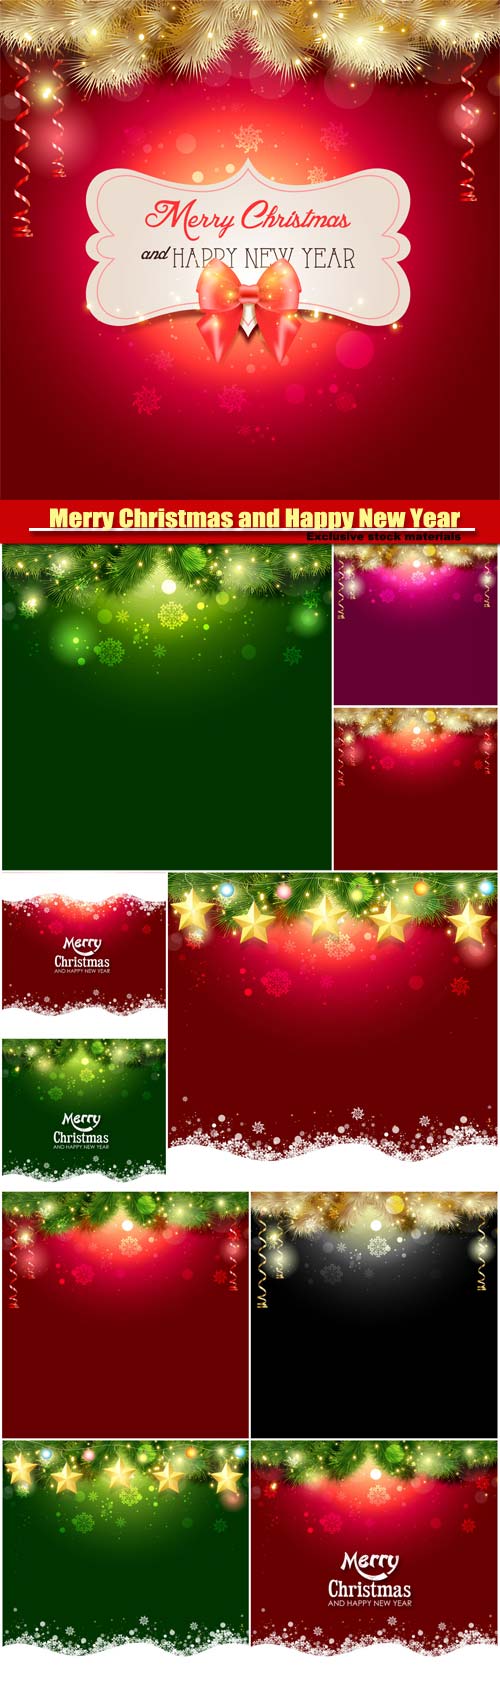 Merry Christmas and Happy New Year vector, background with a glowing effect